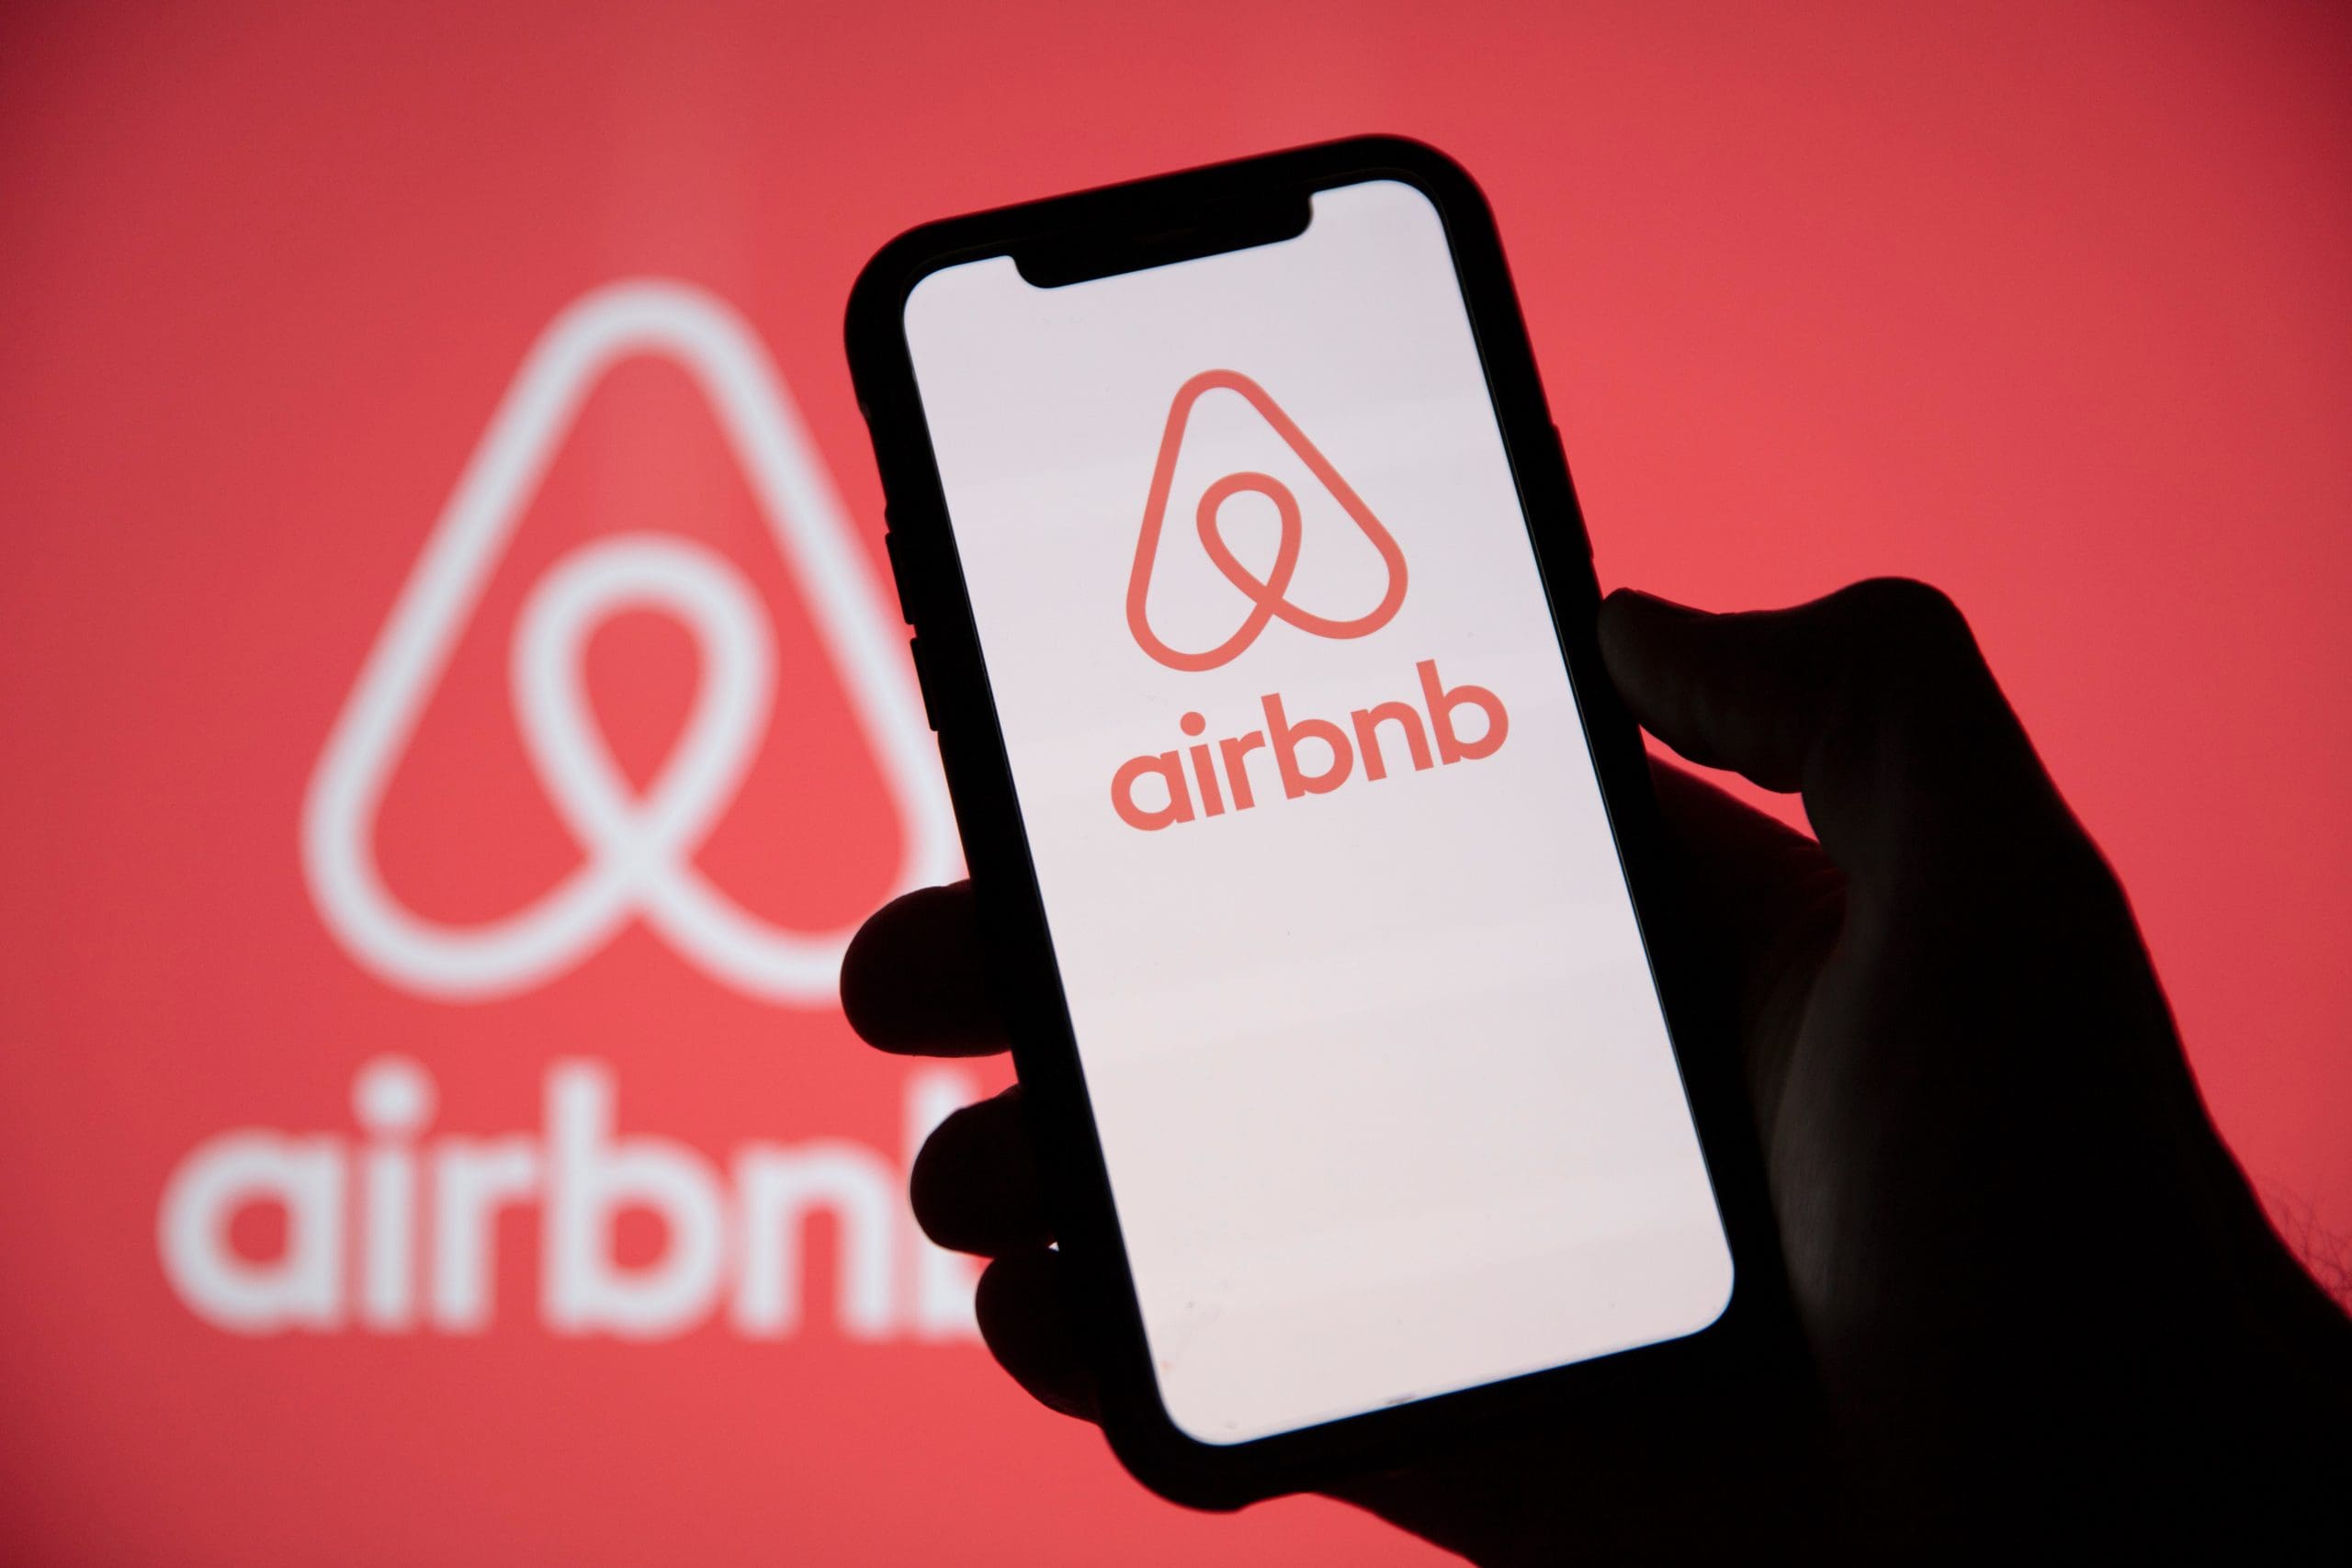 The airbnb logo is displayed on a person's phone.